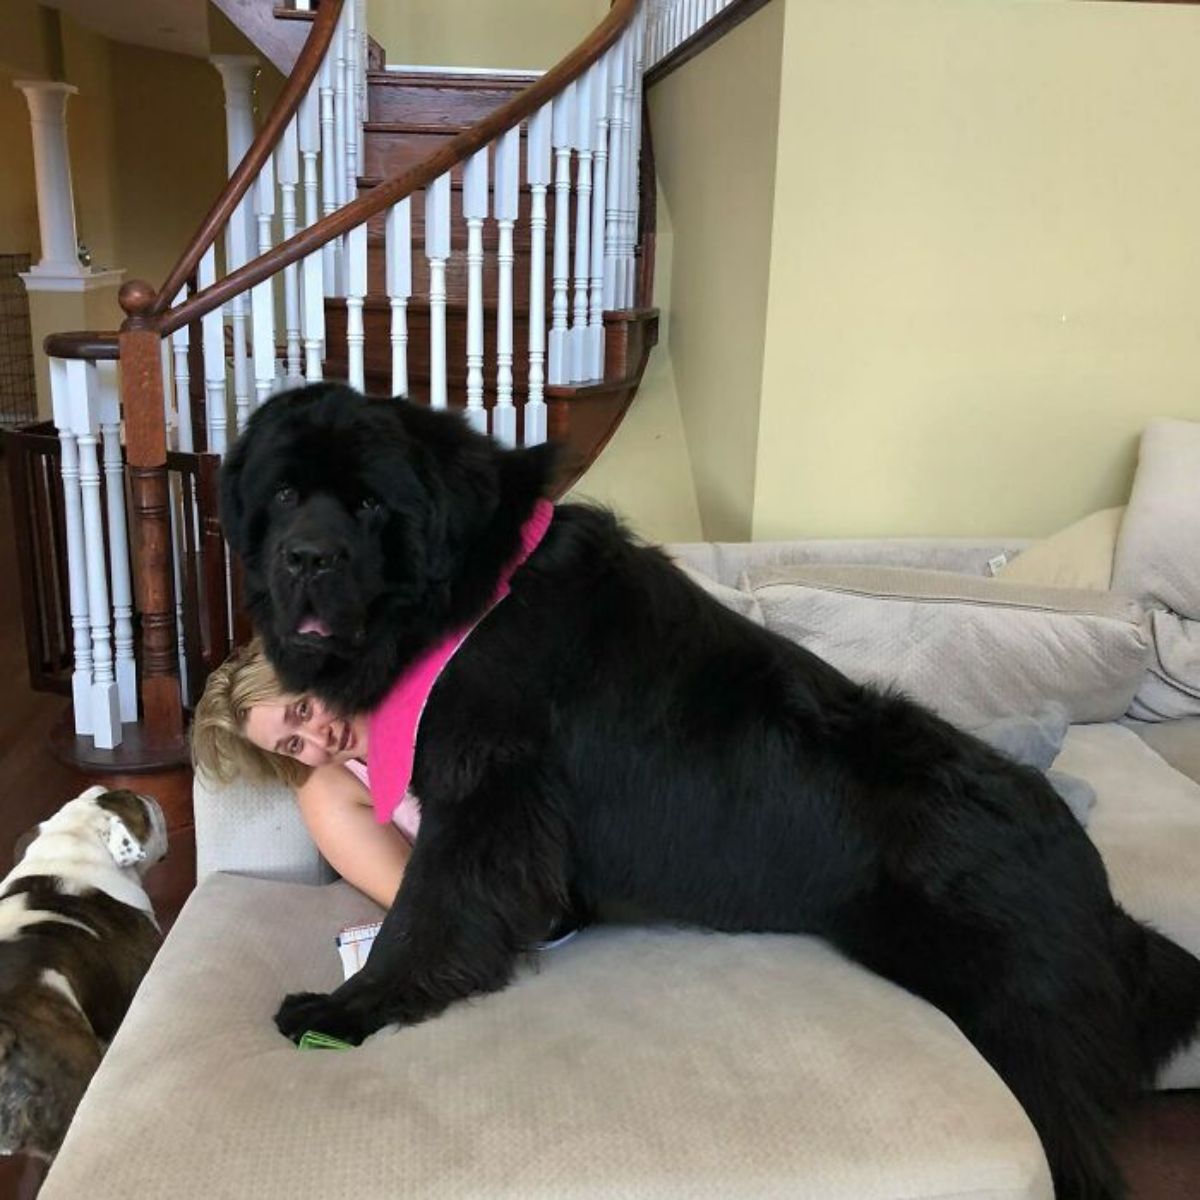 black newfoundland laying on a woman on a large grey sofa with a brown and white dog next to them on the floor